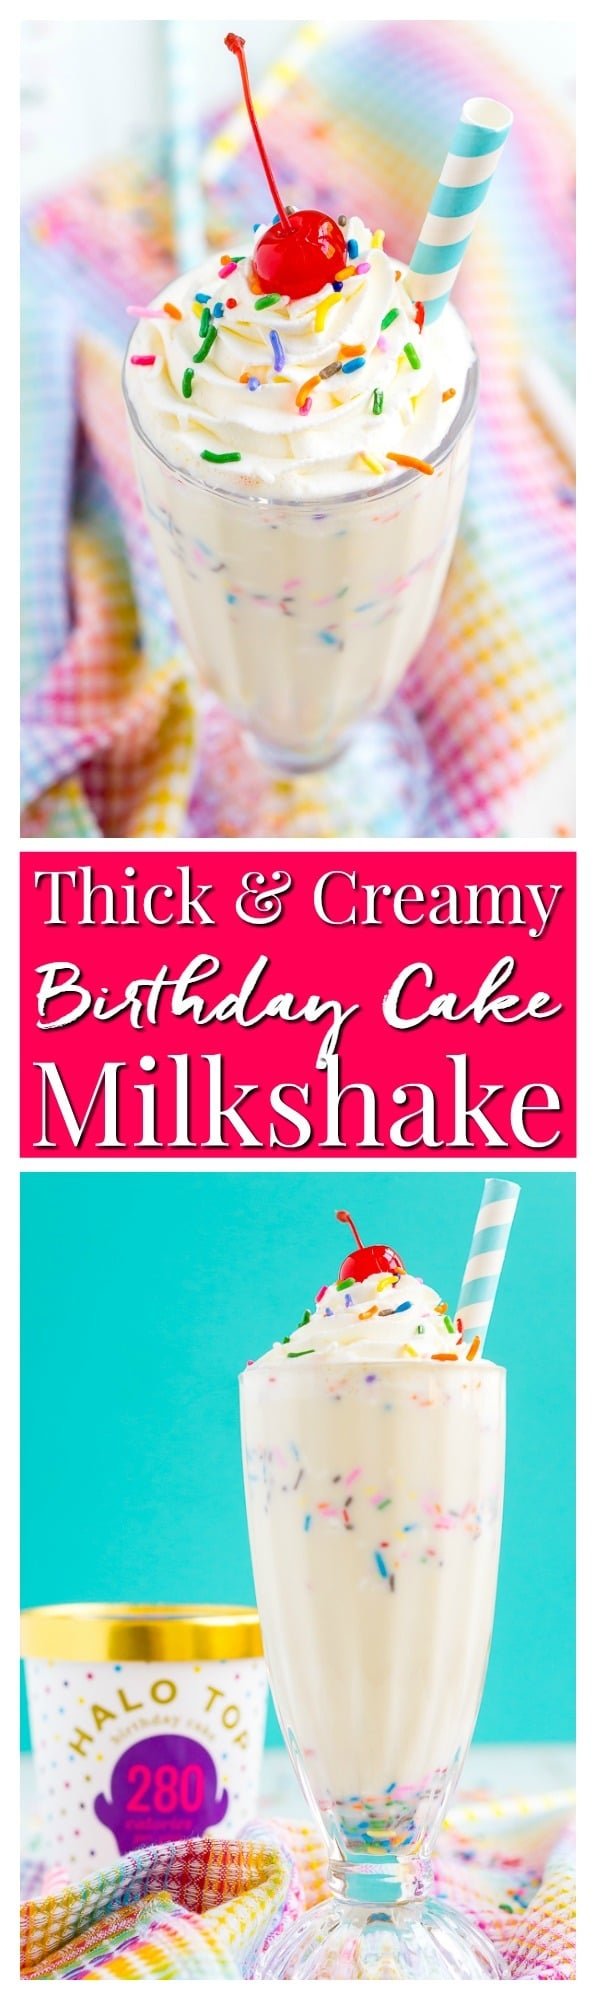 This Birthday Cake Milkshake is ready in 5 minutes and made with just 5 simple ingredients - ice cream, milk, vanilla, sugar, and sprinkles - and is perfect for when you want a quick sweet treat. via @sugarandsoulco